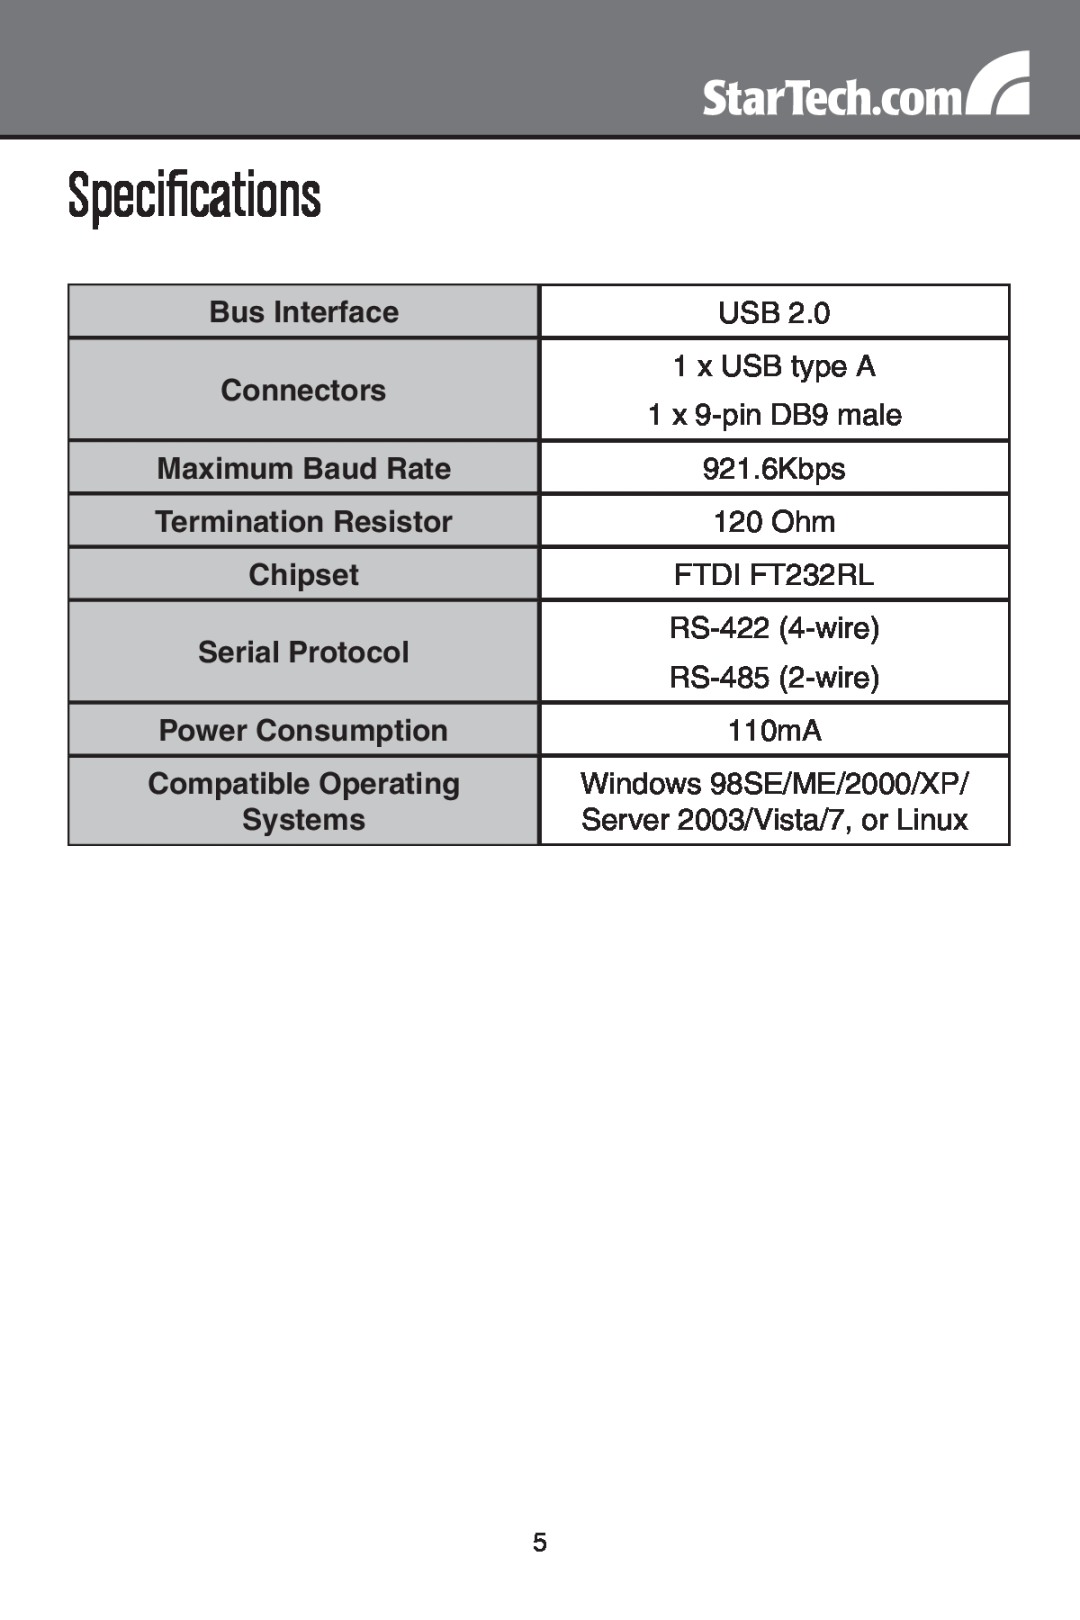 StarTech.com ICUSB422 Specifications, Bus Interface, Connectors, x USB type A, Maximum Baud Rate, 921.6Kbps, Chipset 